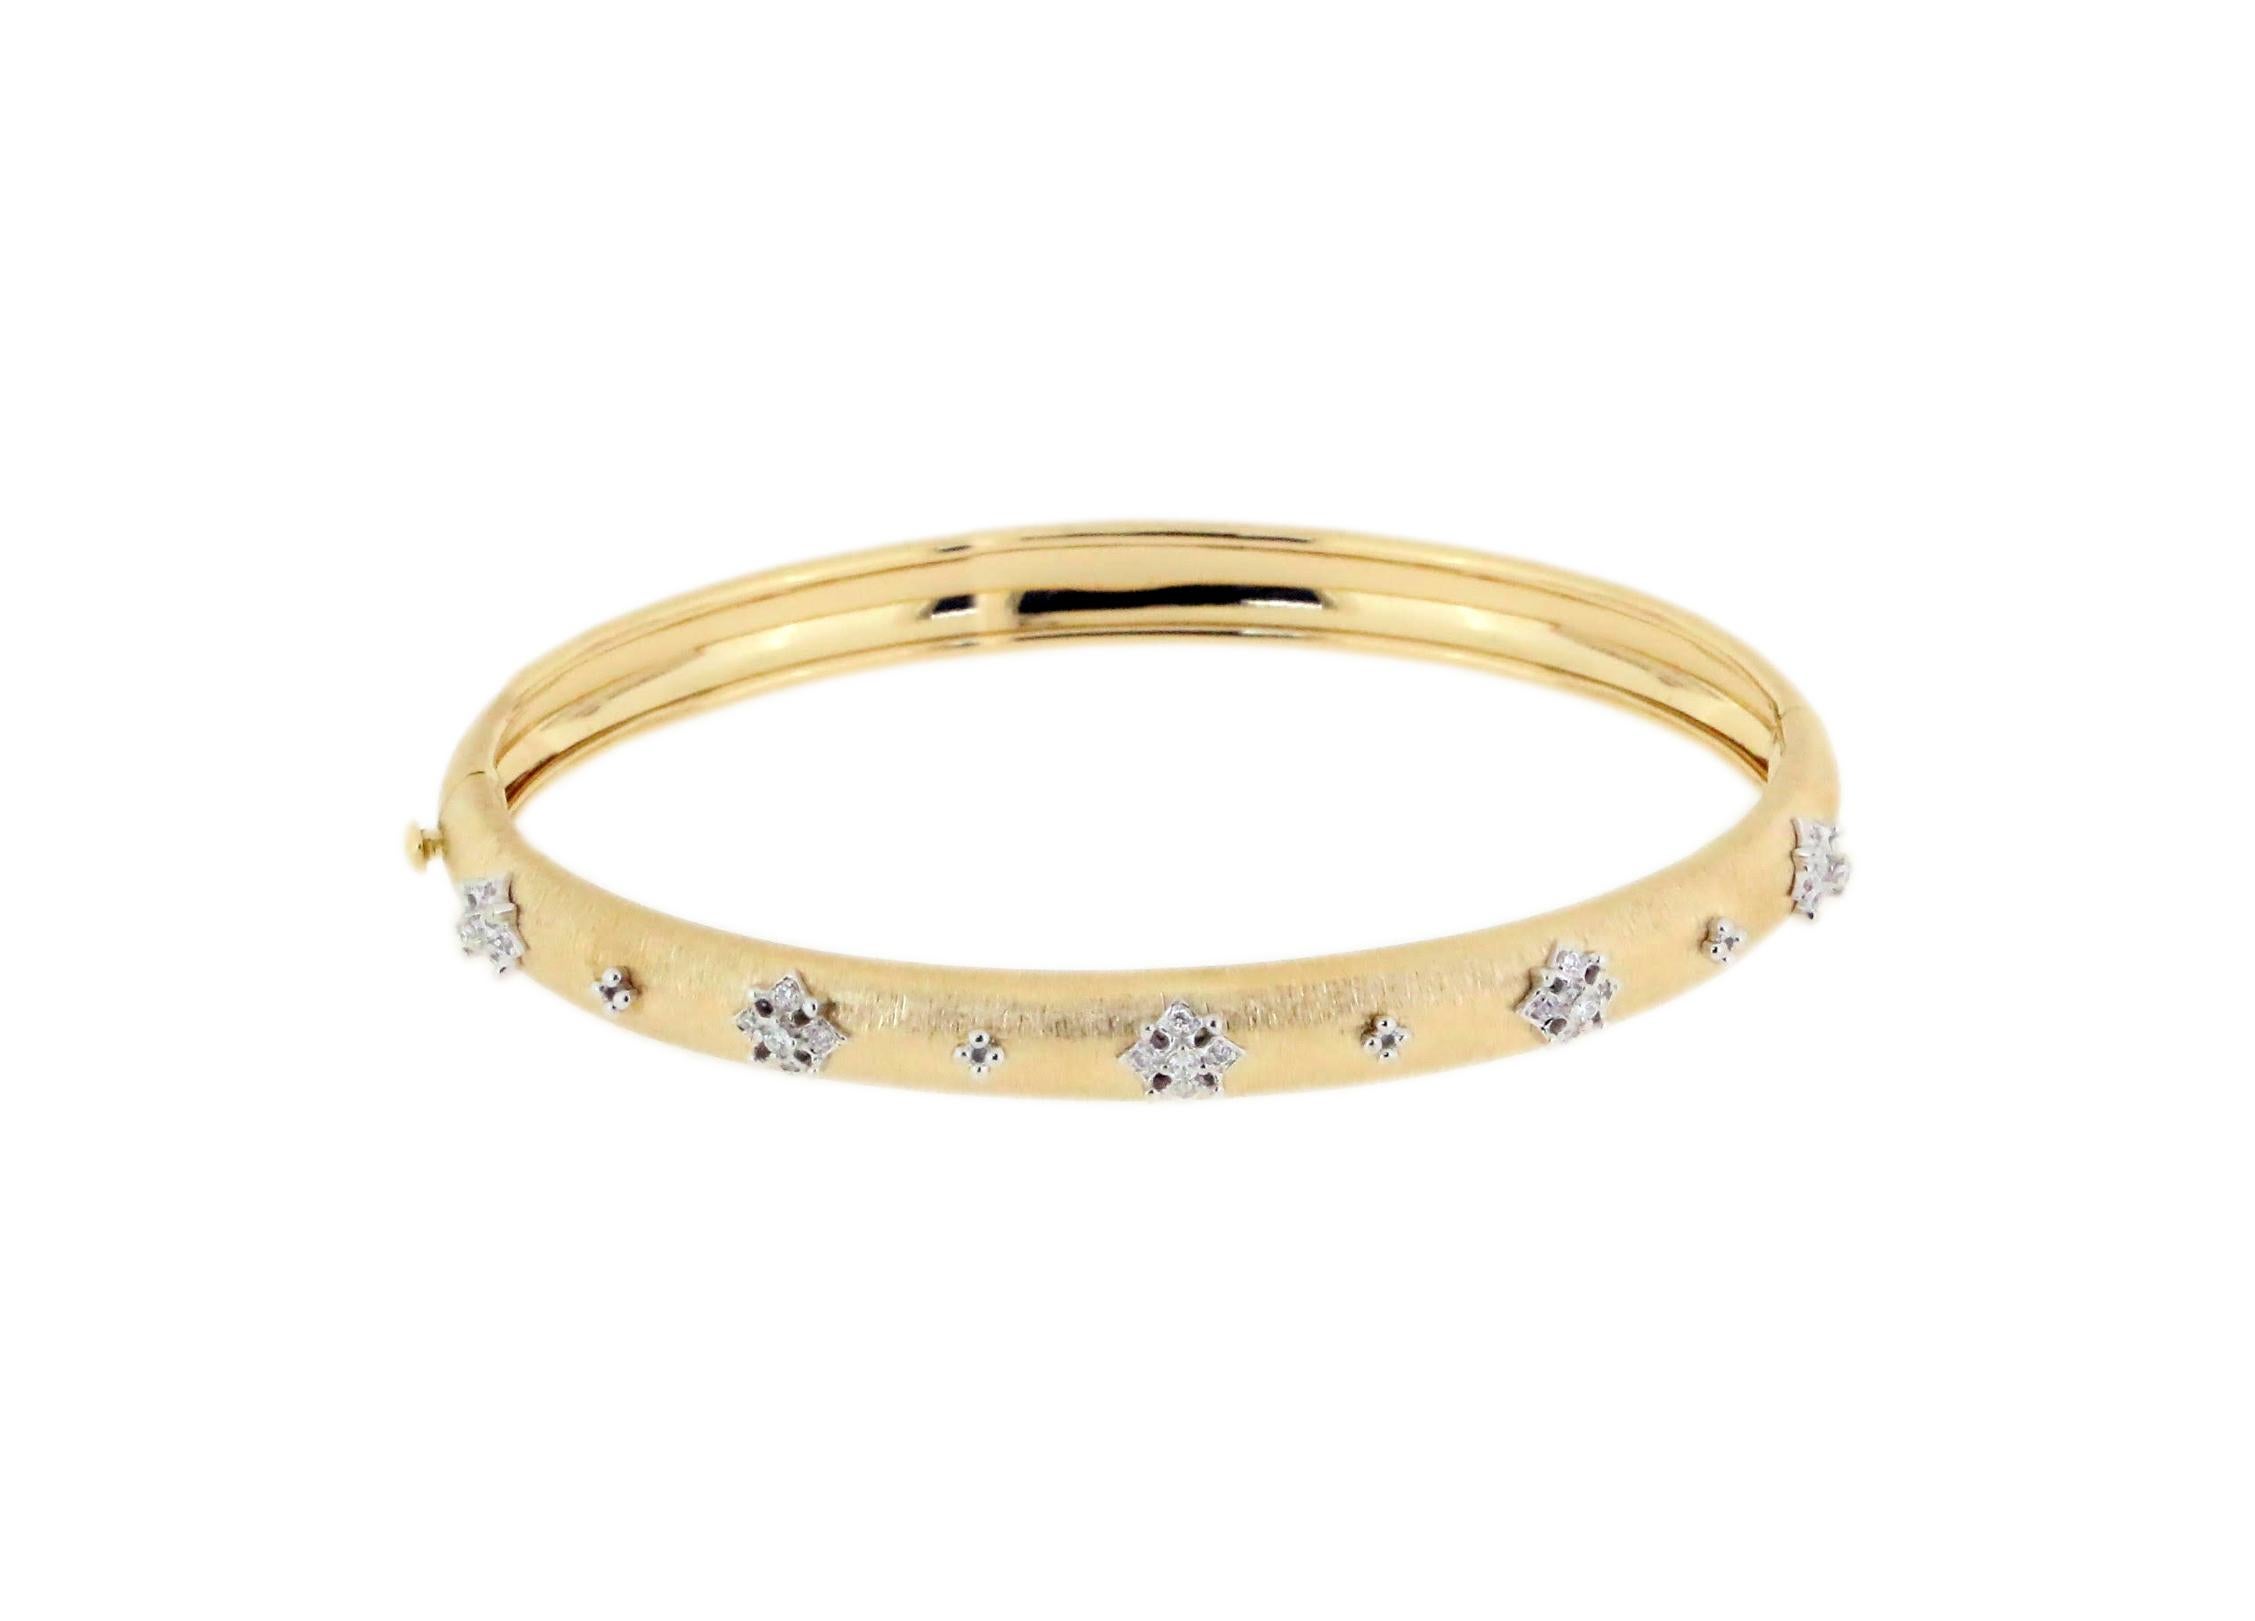 Goddess A1590-A5ZZ, 18K White and Yellow Gold Bangle with Diamonds

18K White and Yellow Gold - 10.51gm
25 Round Diamonds -0.14c
Flowers in White Gold
Bracelet size - 45x55 mm